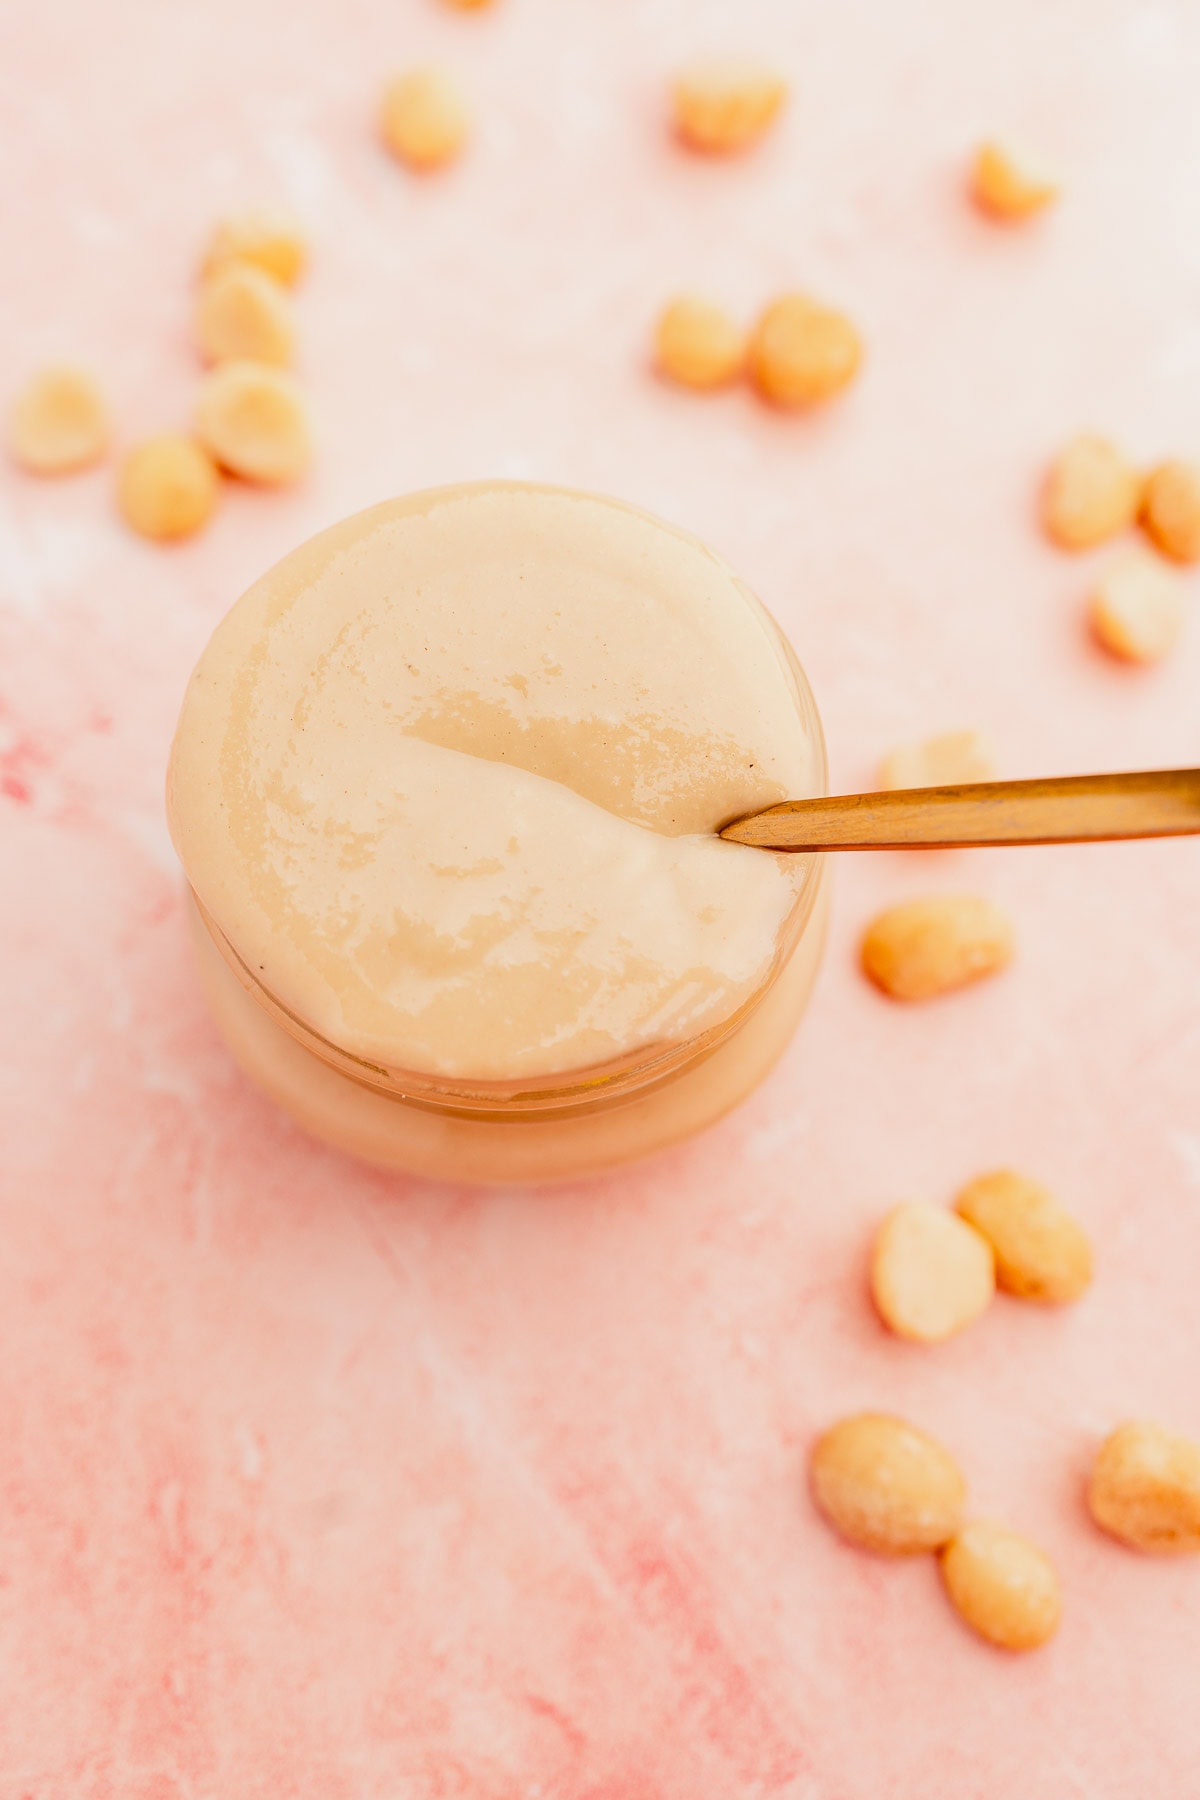 A jar of smooth macadamia nut butter with a wooden spoon on a pink surface, surrounded by scattered peanuts.